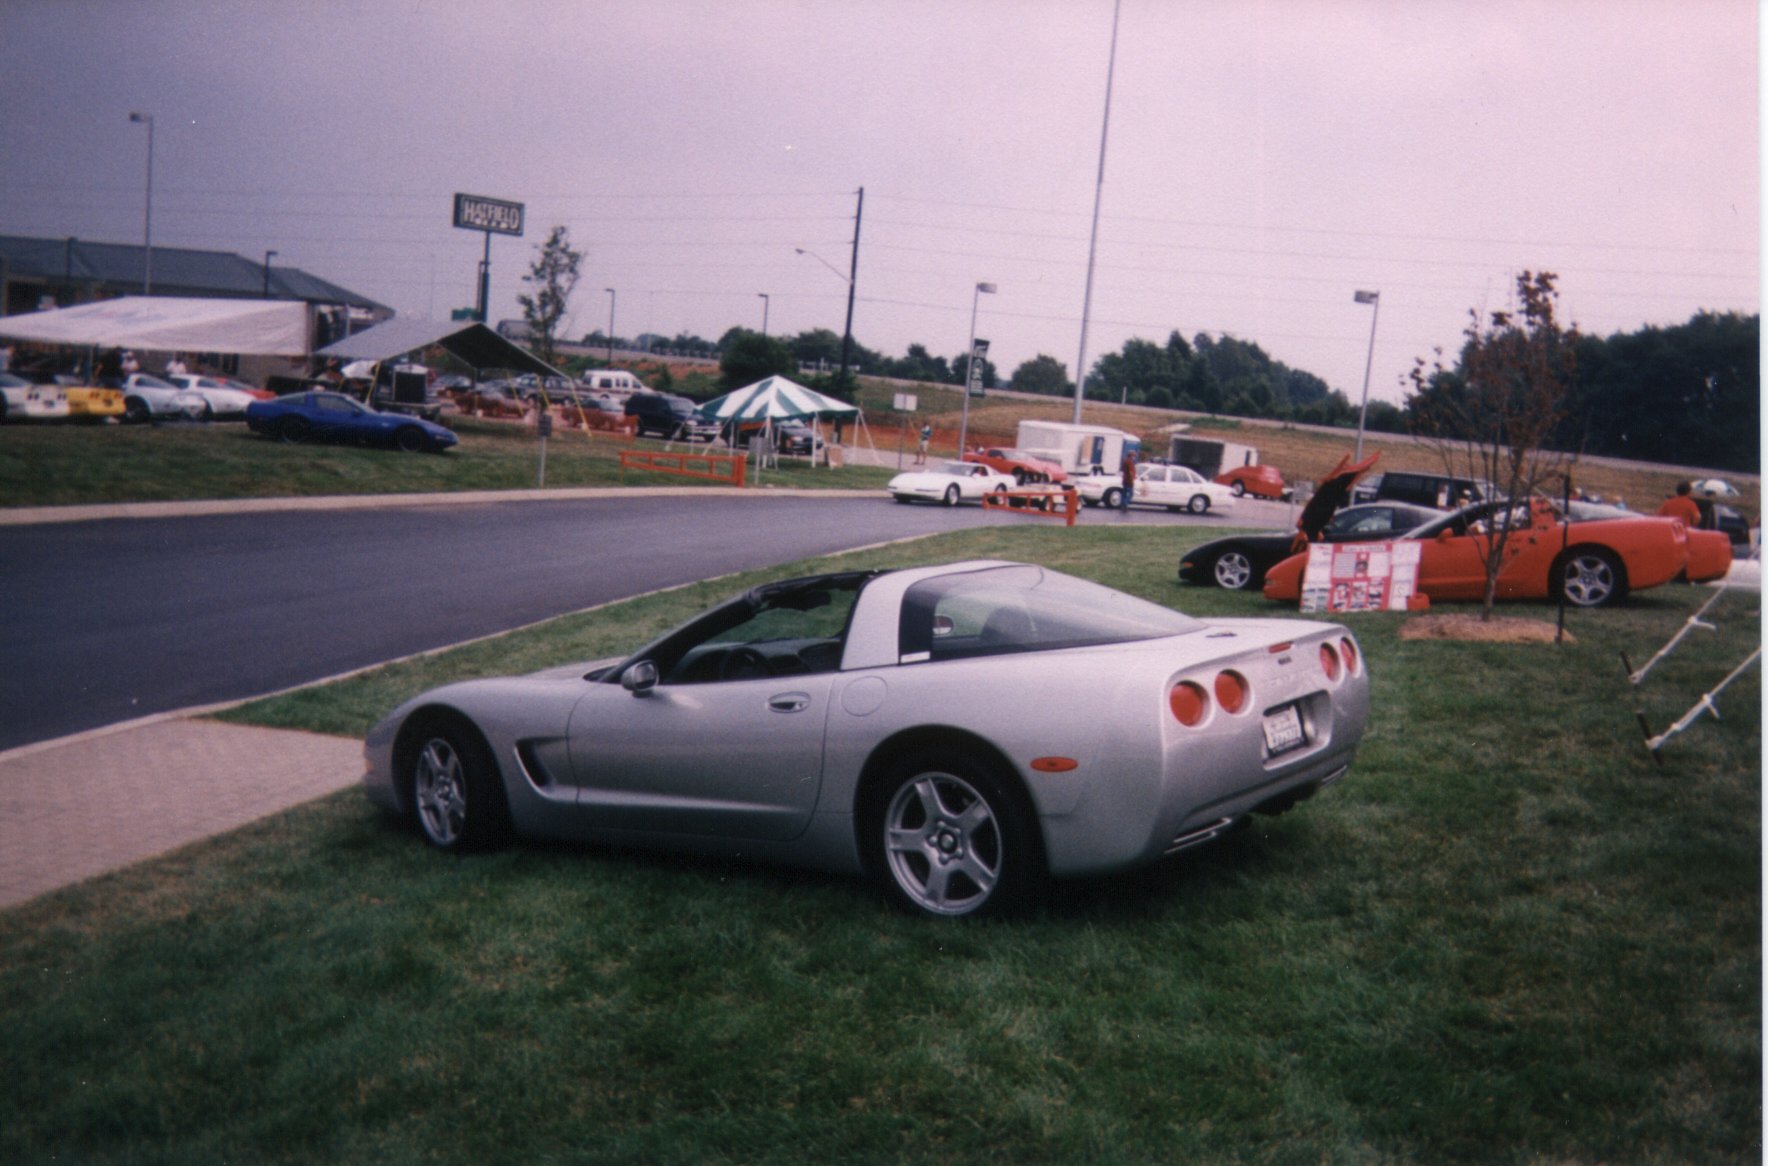 Rear photo of Dave's C5 on the lawn, with spectators and the parking lot full of Vettes 